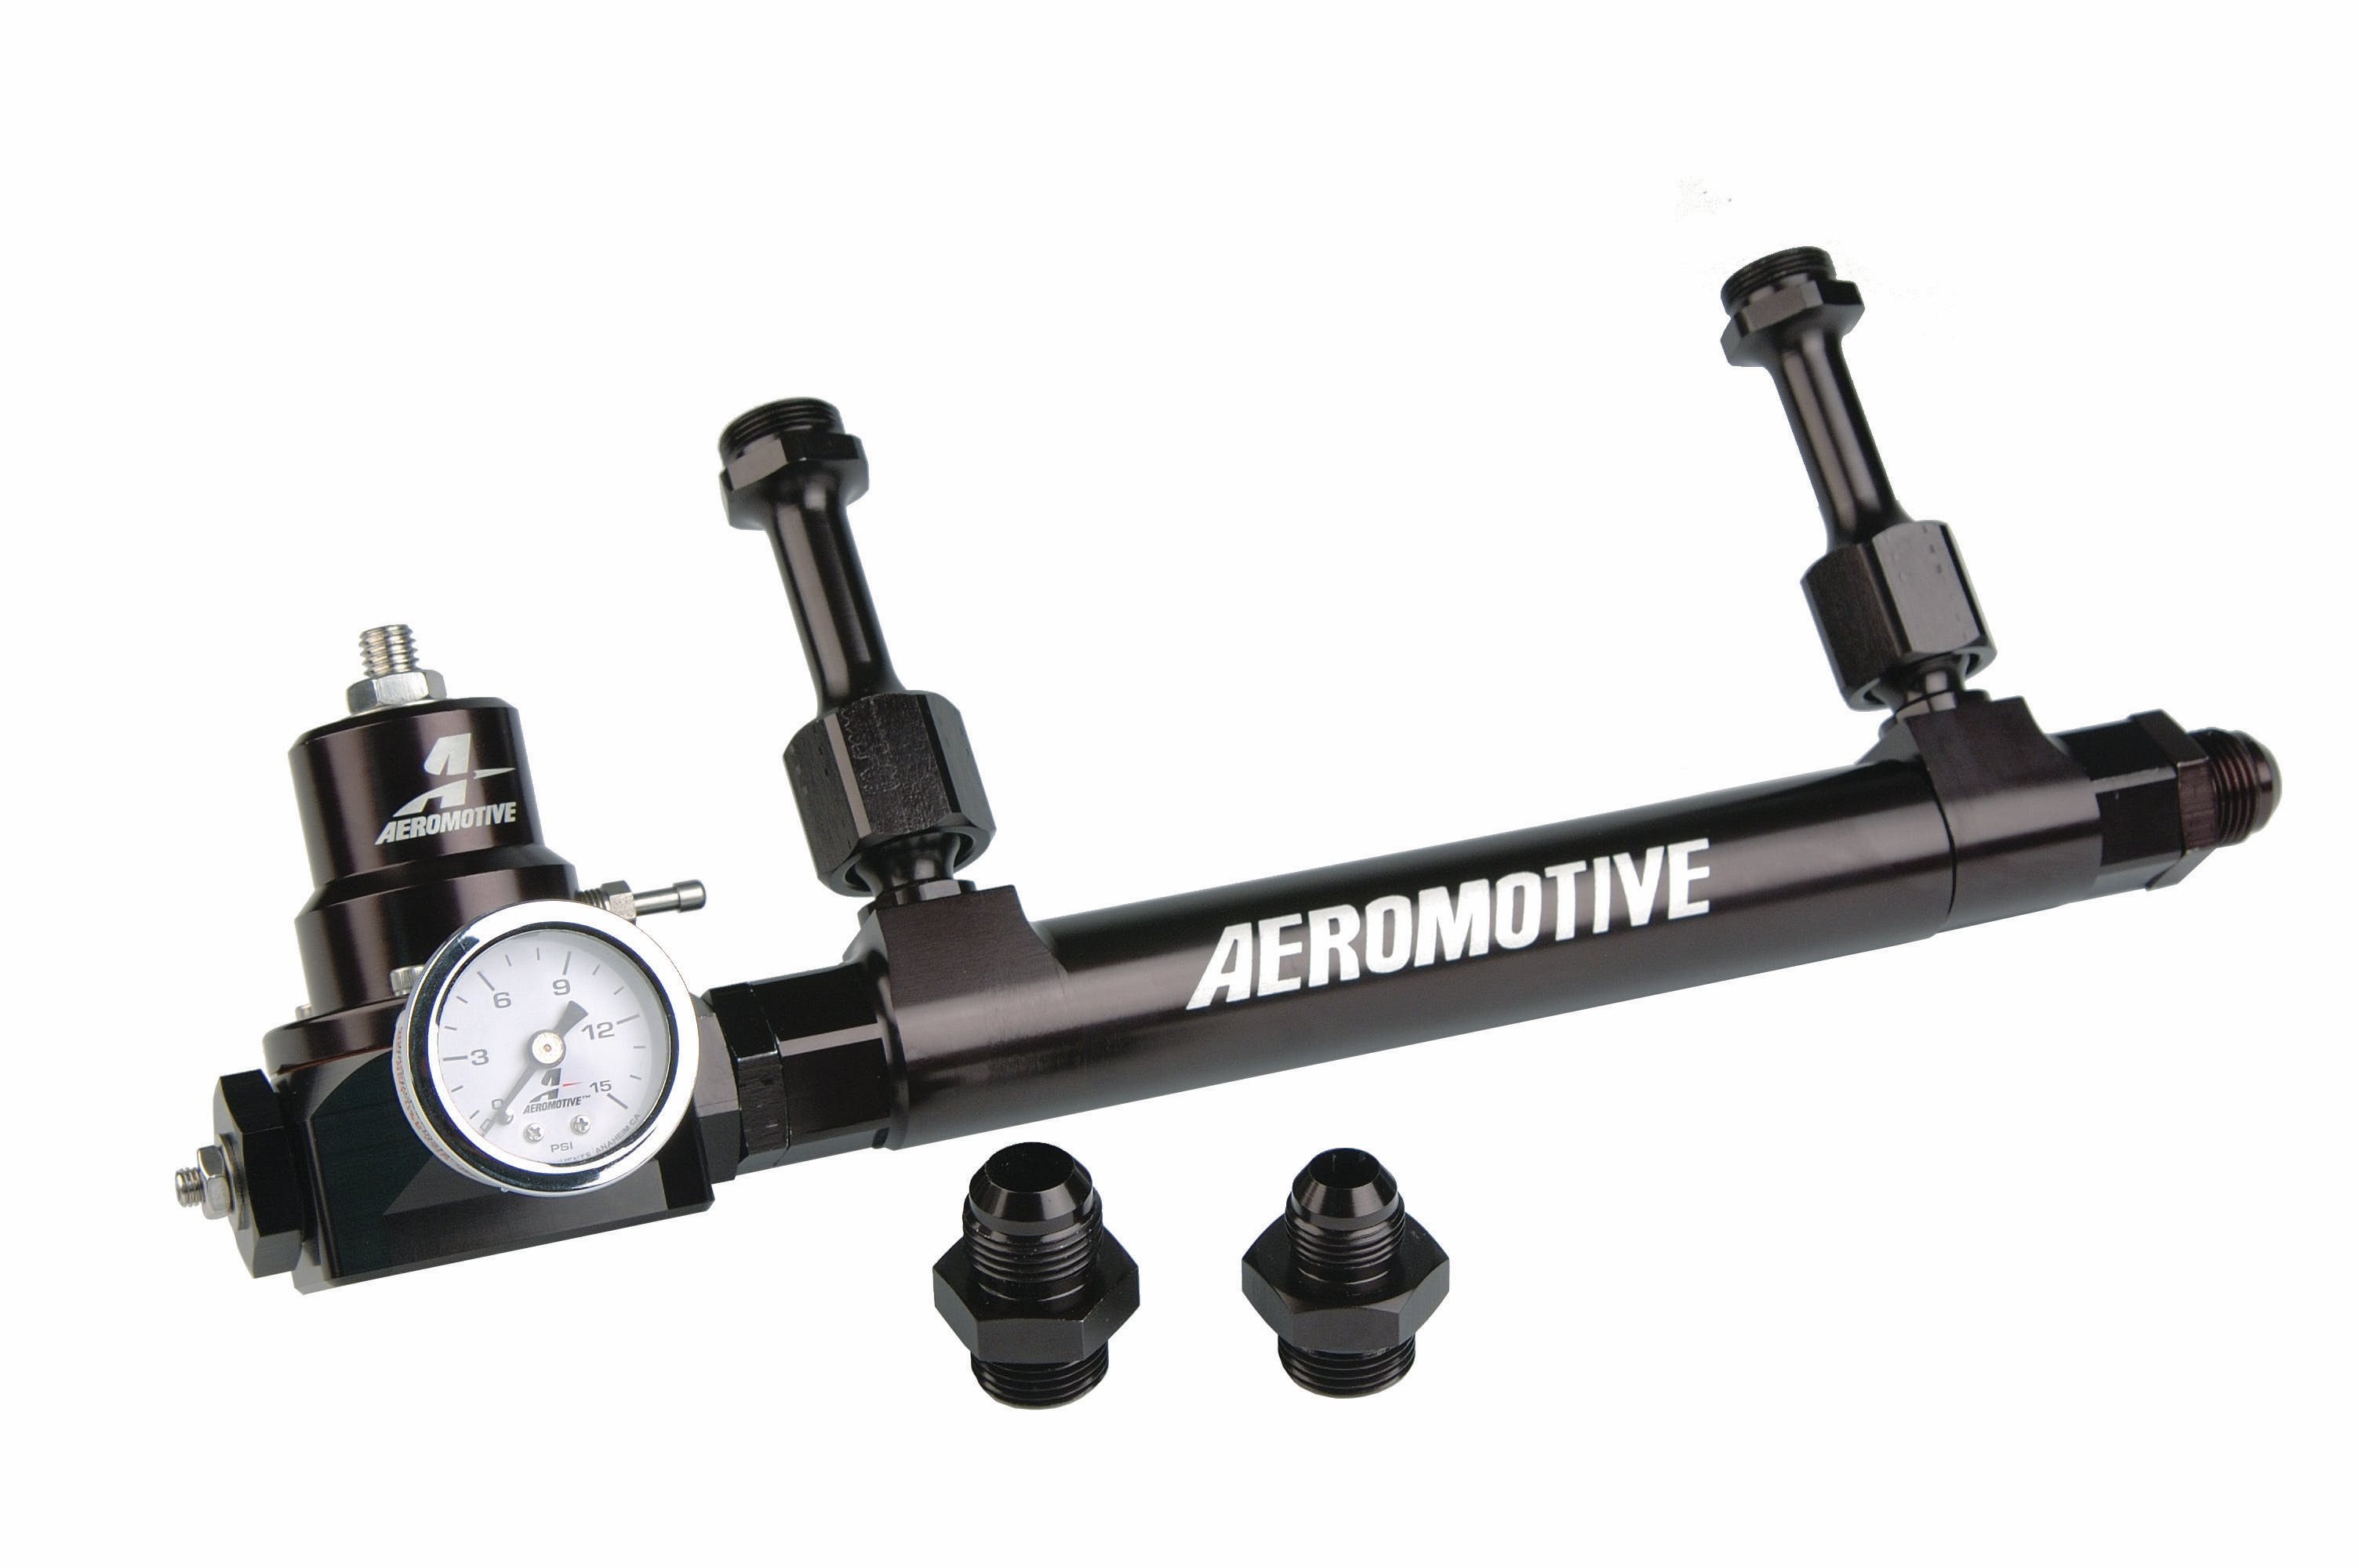 Aeromotive Fuel System 17250 14202 / 13212 Combo Kit For Demon Style Carb